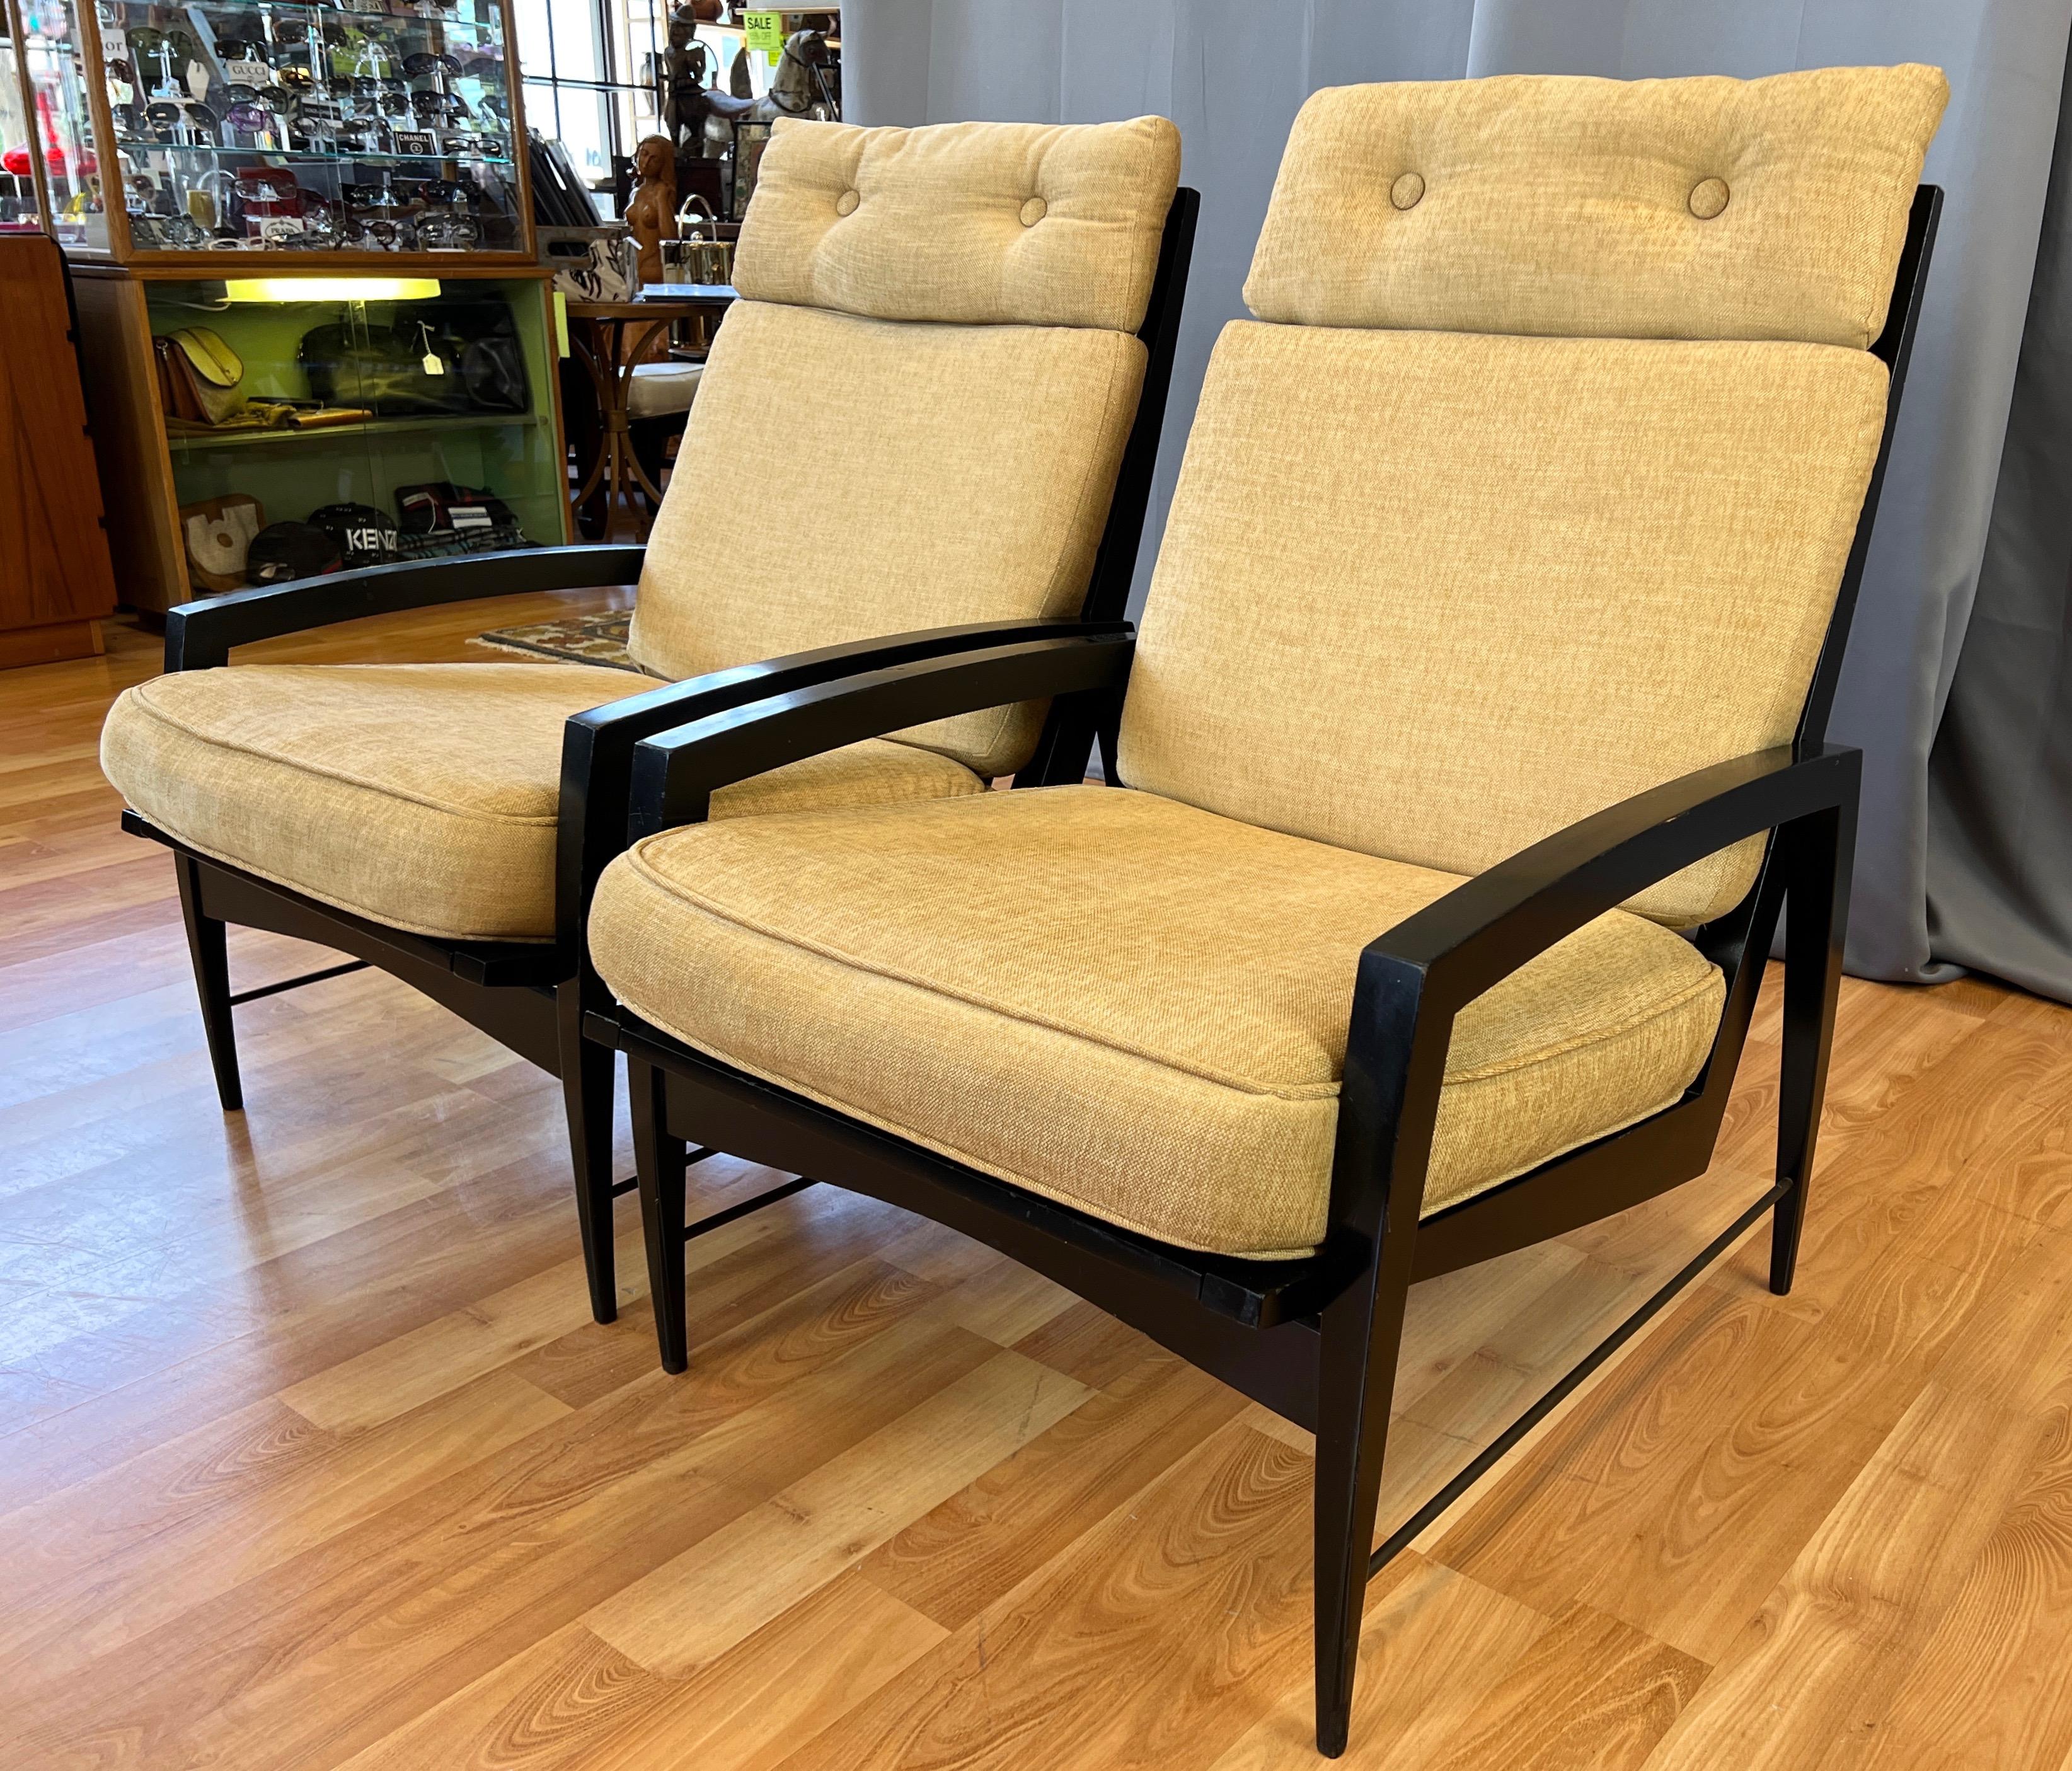 Pair of Dan Johnson for Selig Black Lacquered High-Back Lounge Chairs, 1950s For Sale 6